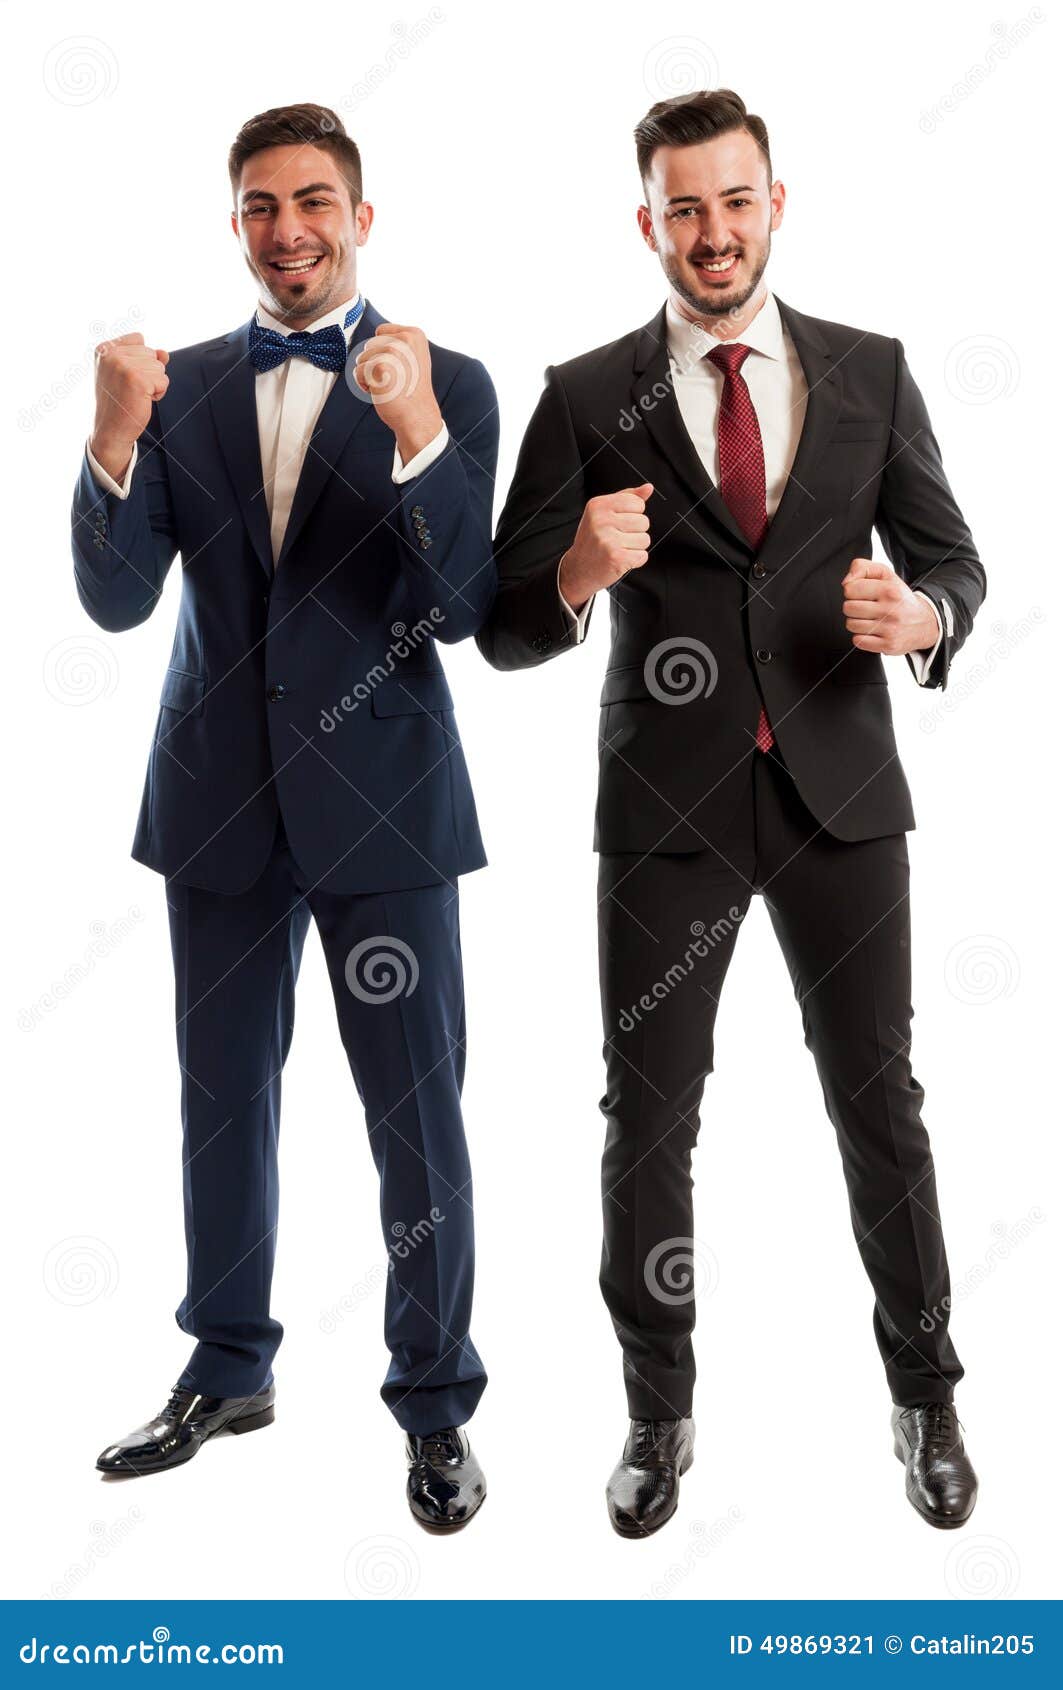 Successful business people stock image. Image of arms - 49869321